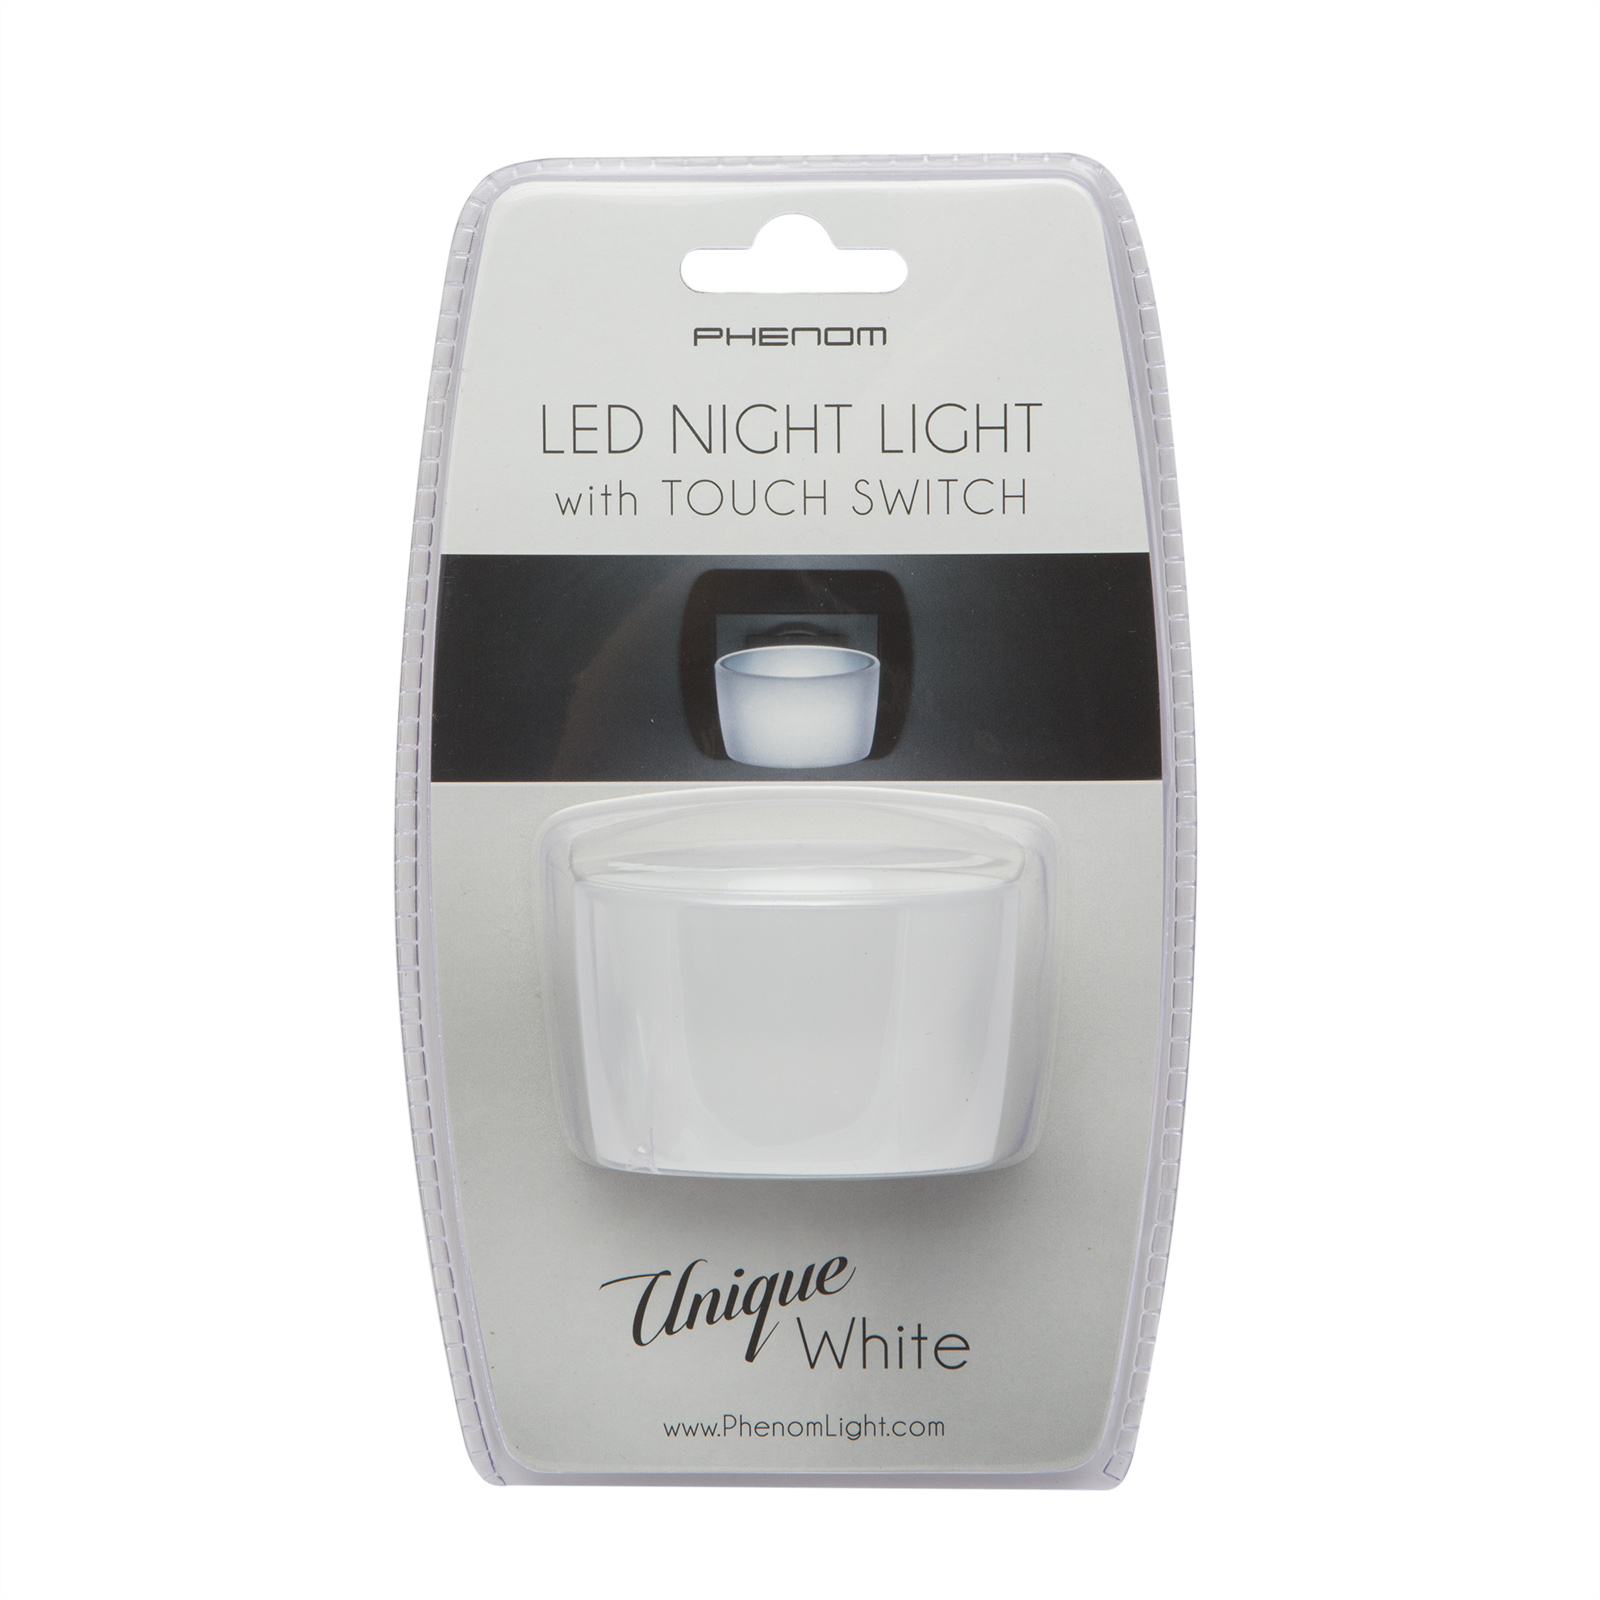 Phenom LED Night Light with Touch Switch thumb